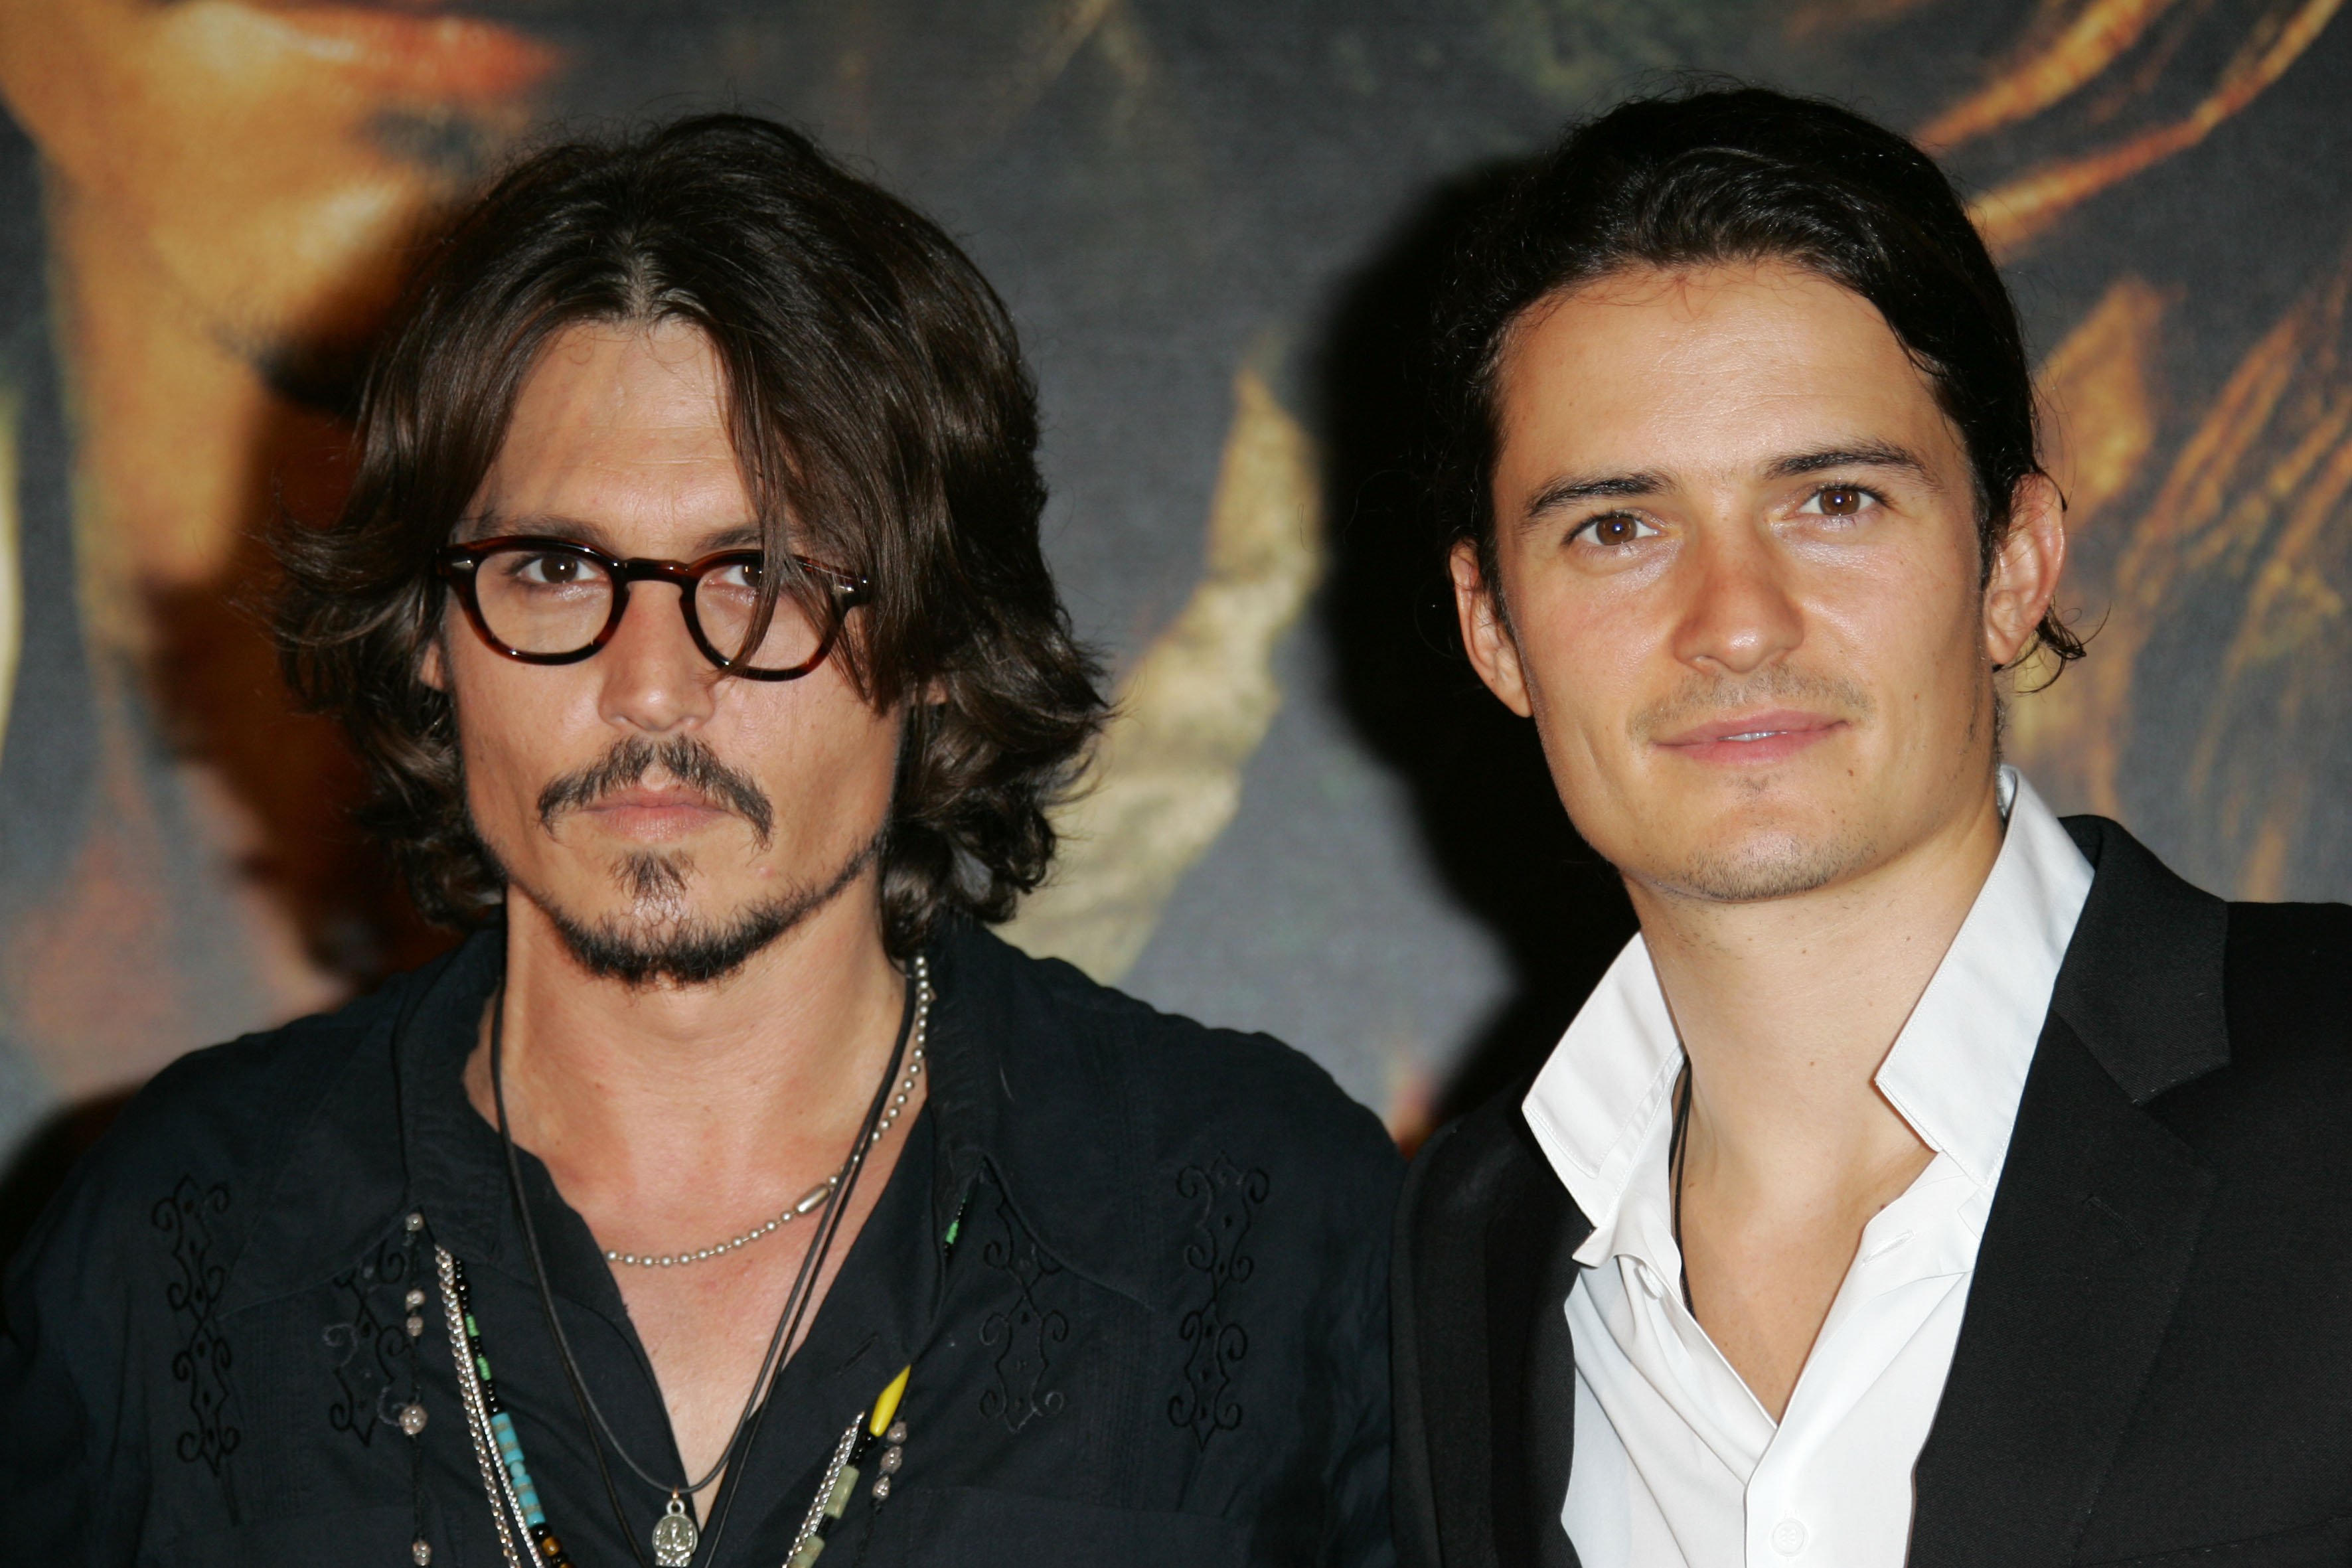 Johnny Depp and Orlando Bloom at the Gaumont Marignan Theater in Paris, France